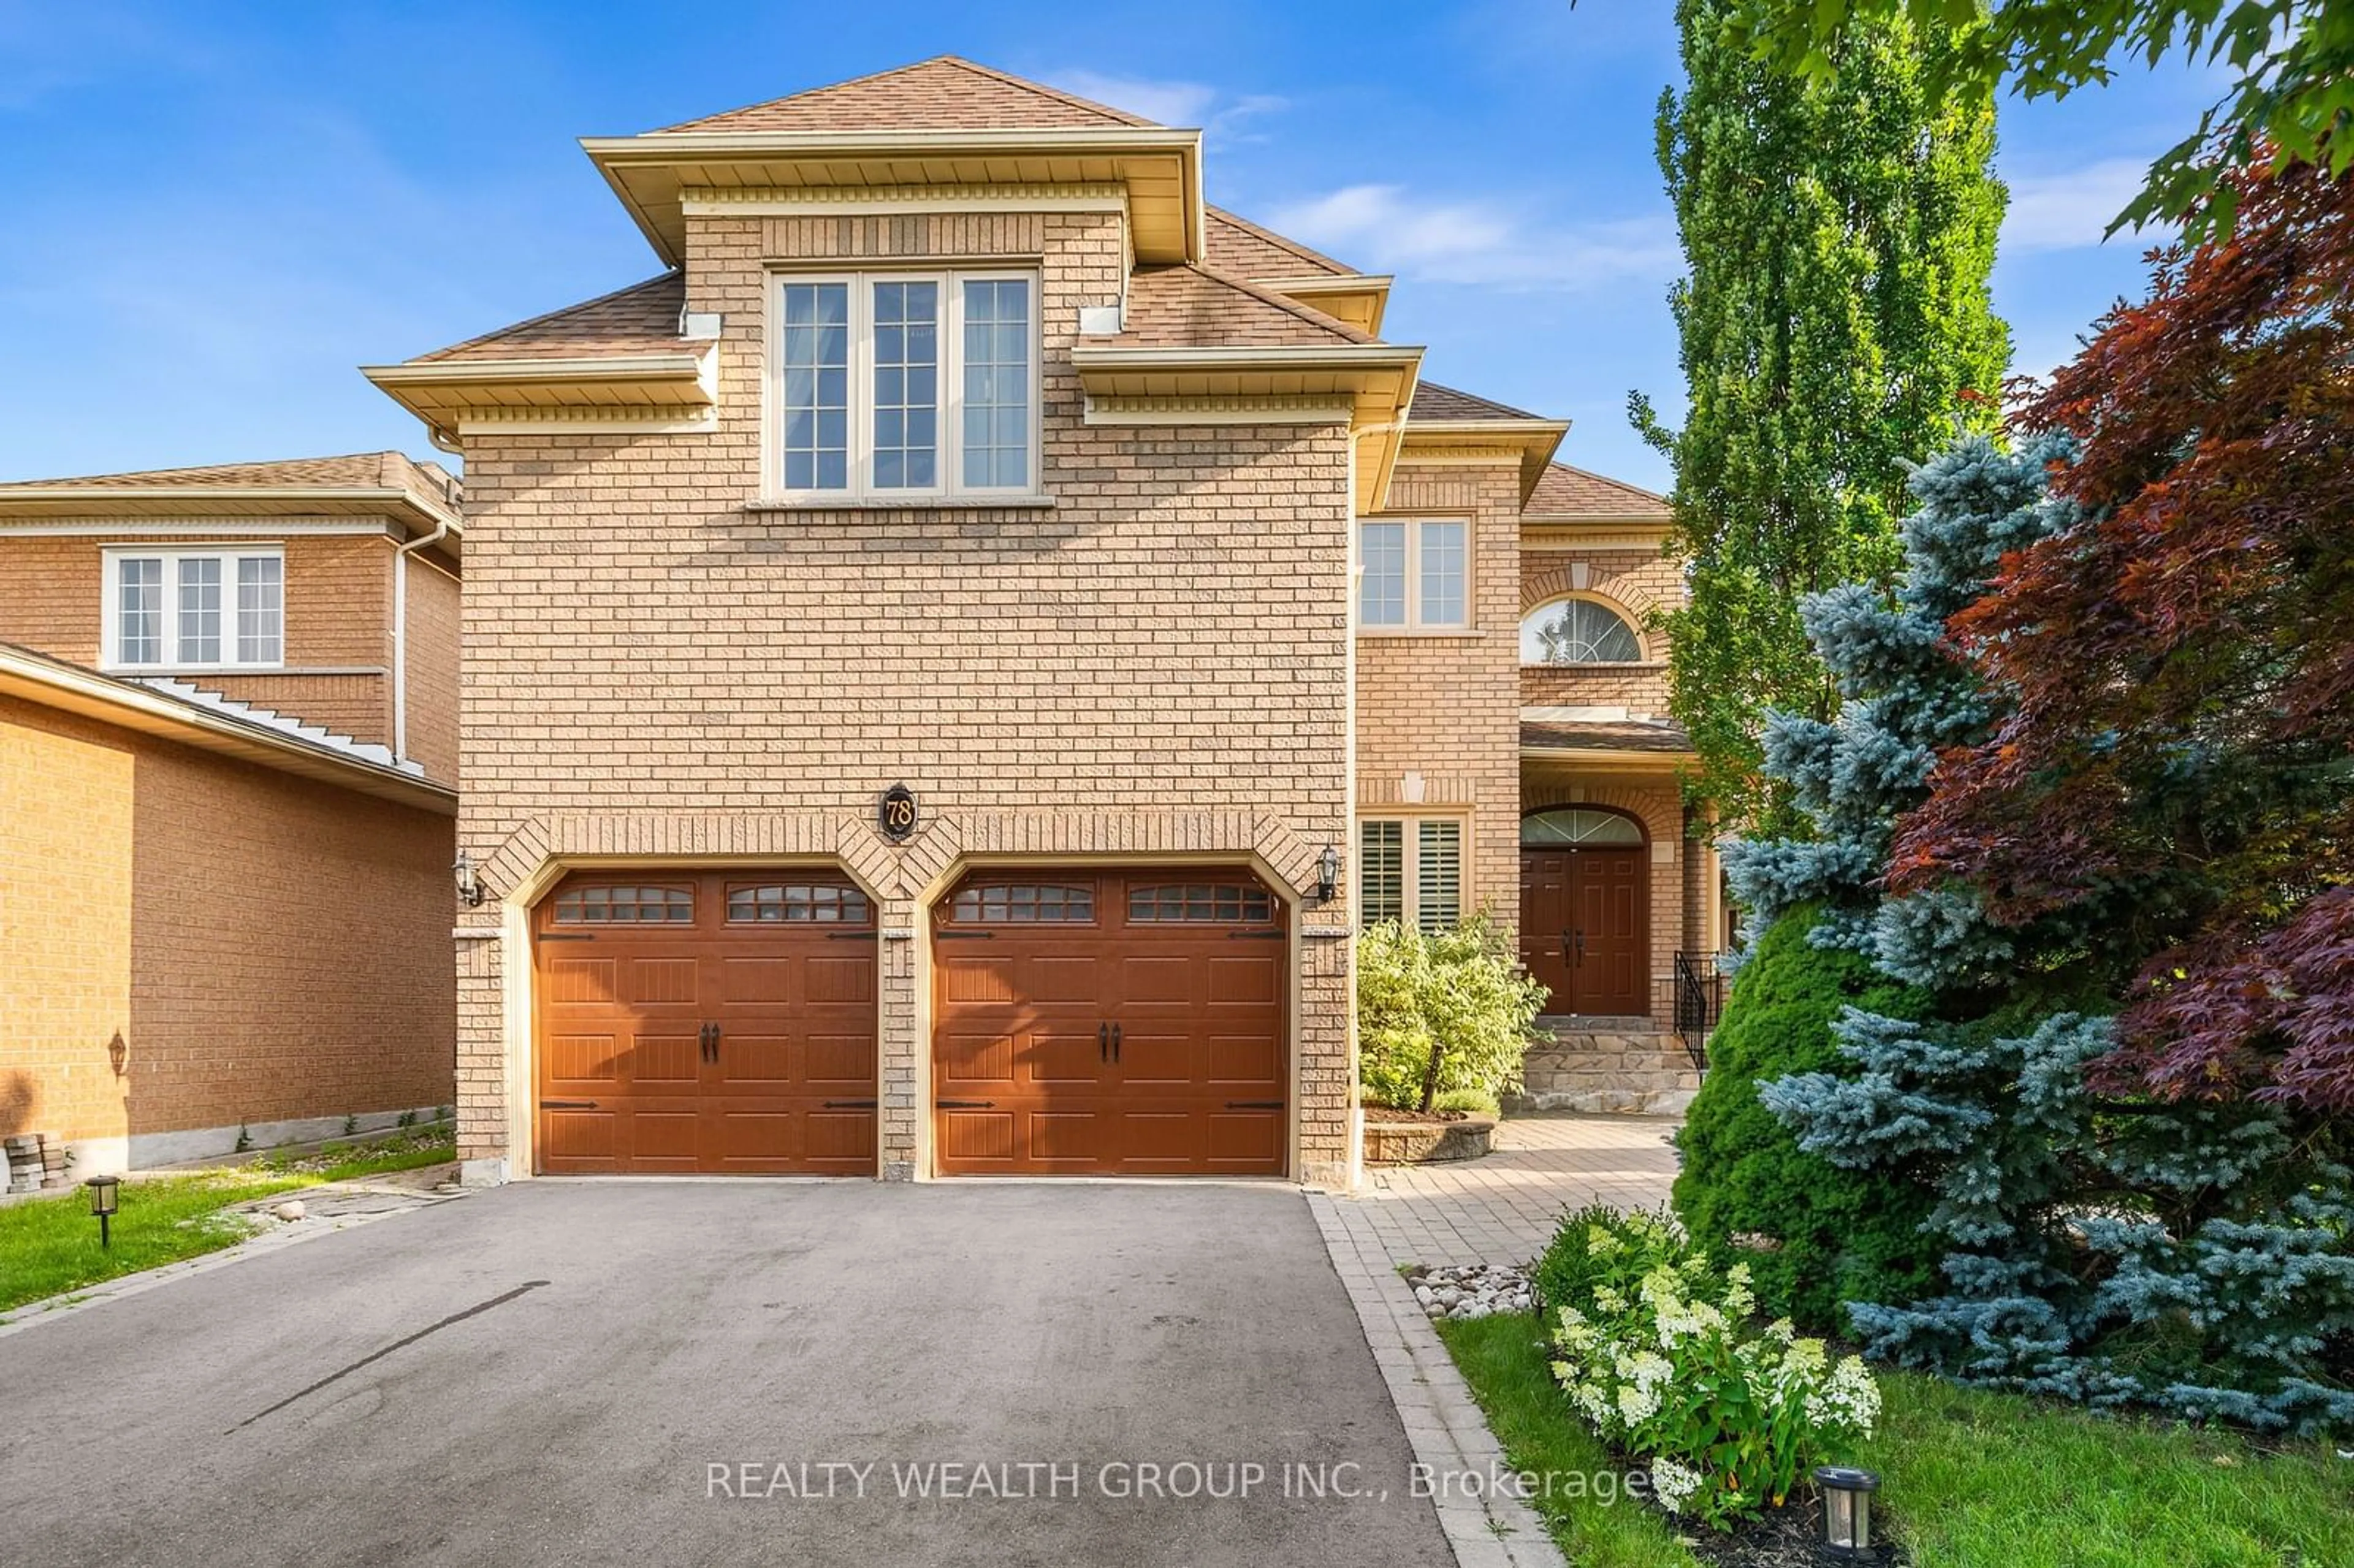 Home with brick exterior material for 78 bradgate Dr, Markham Ontario L3T 7M3